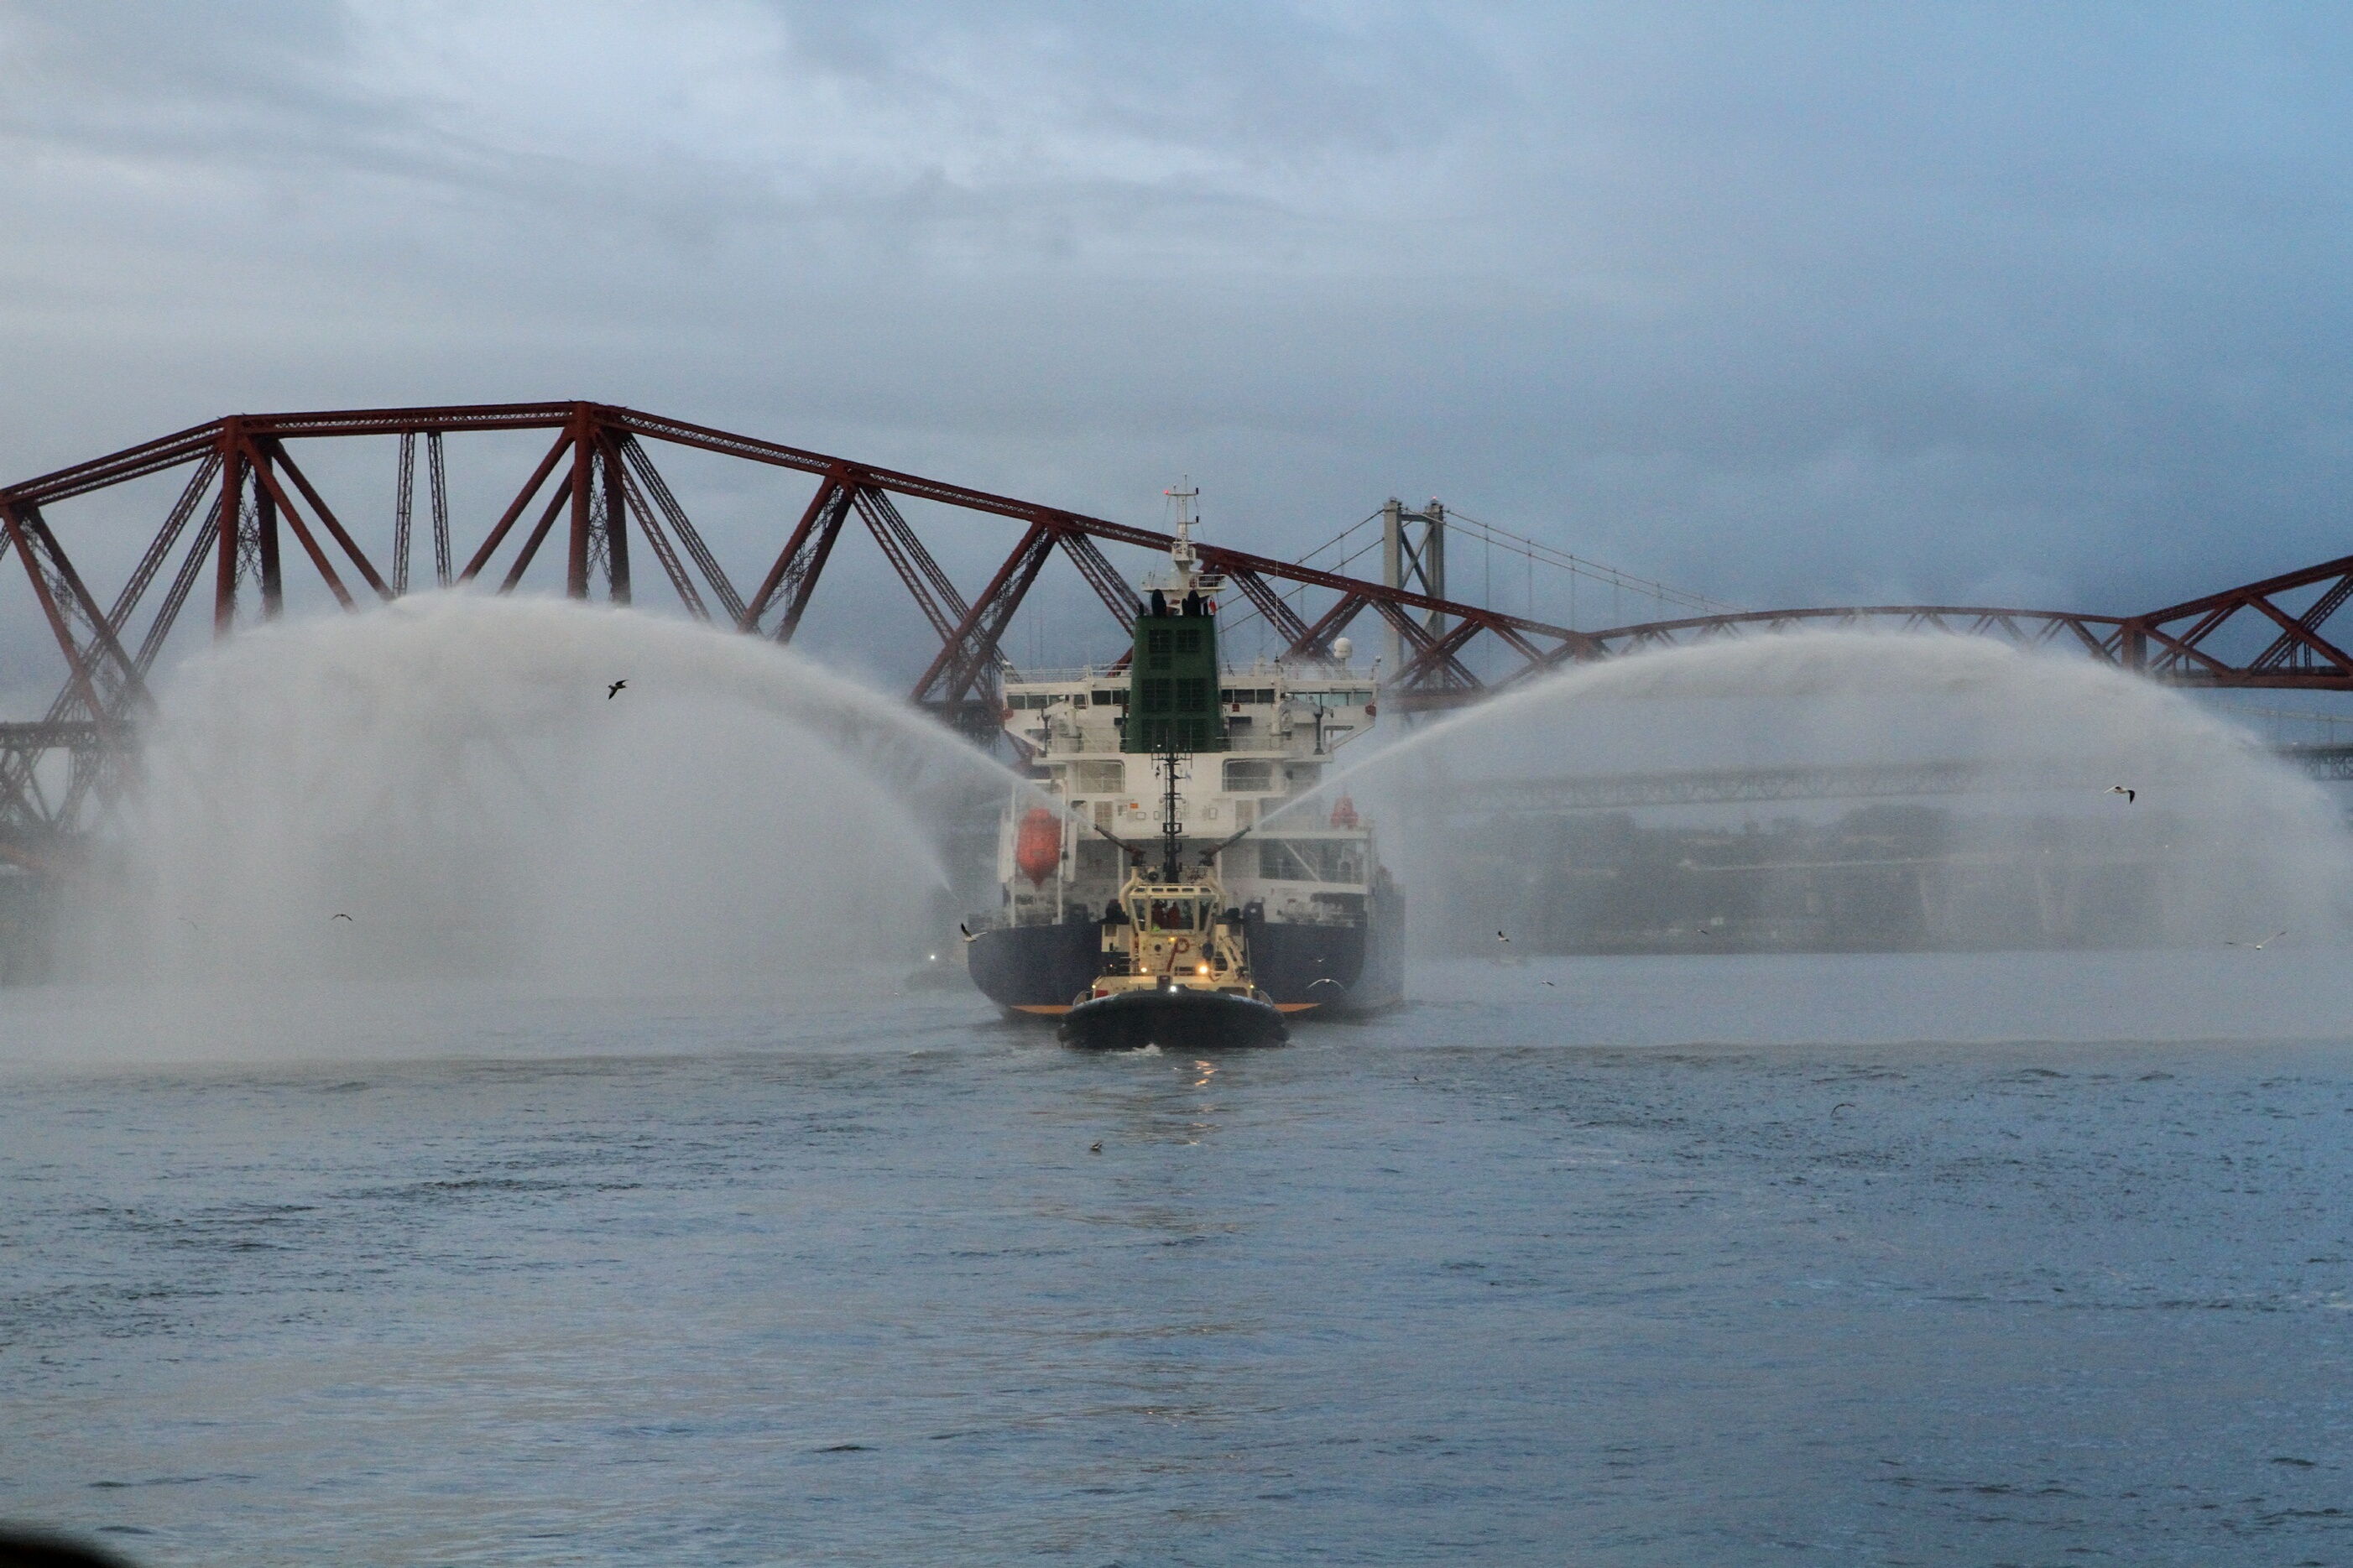 Water cannons mark the arrival of the INEOS Insight into Grangemouth